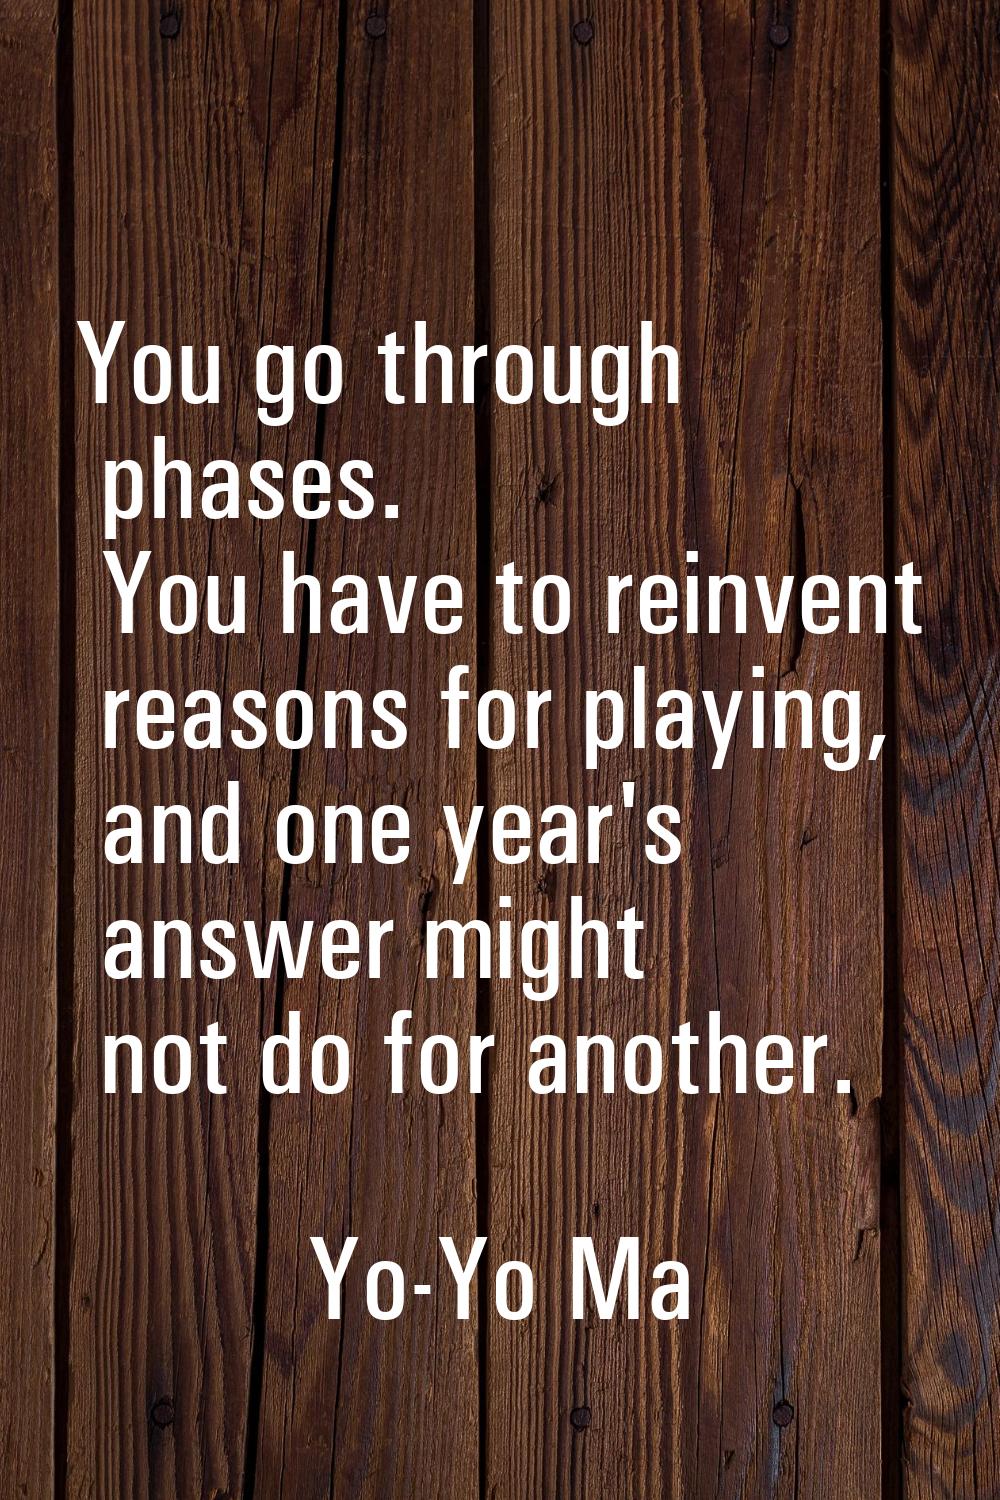 You go through phases. You have to reinvent reasons for playing, and one year's answer might not do